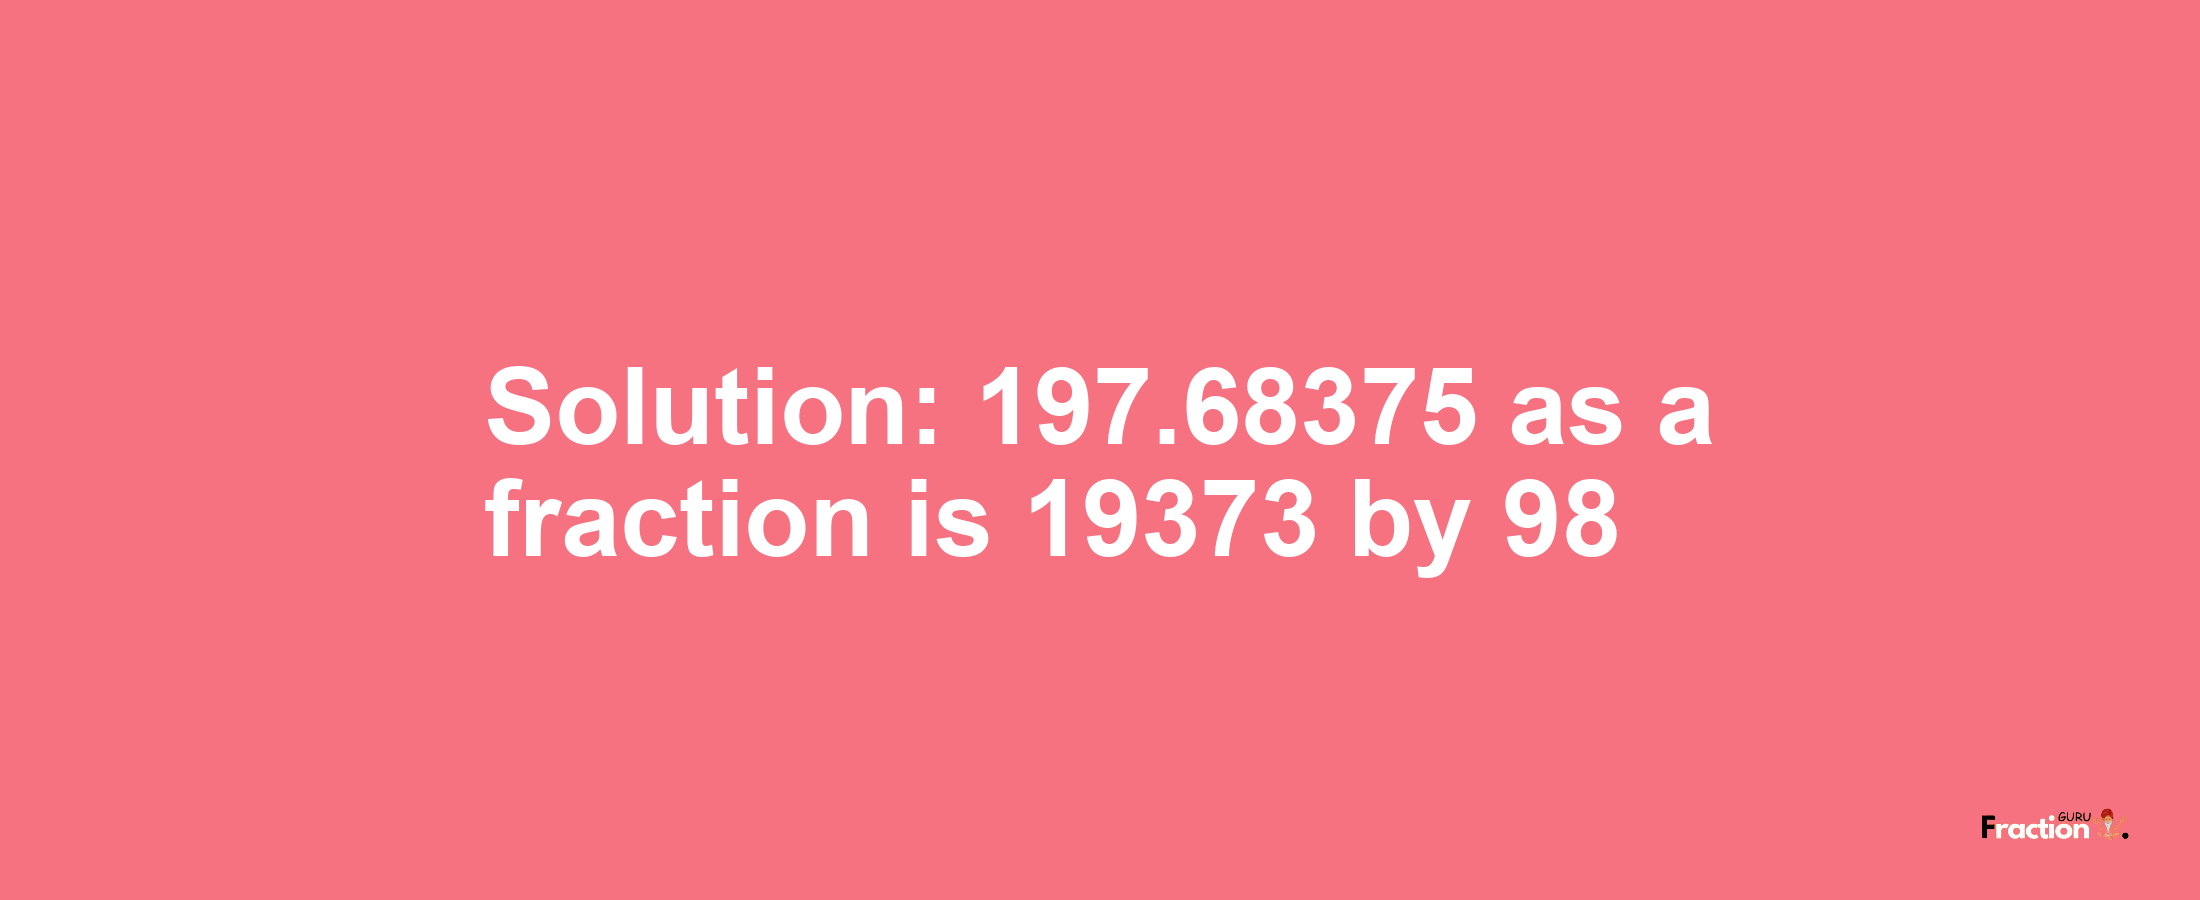 Solution:197.68375 as a fraction is 19373/98